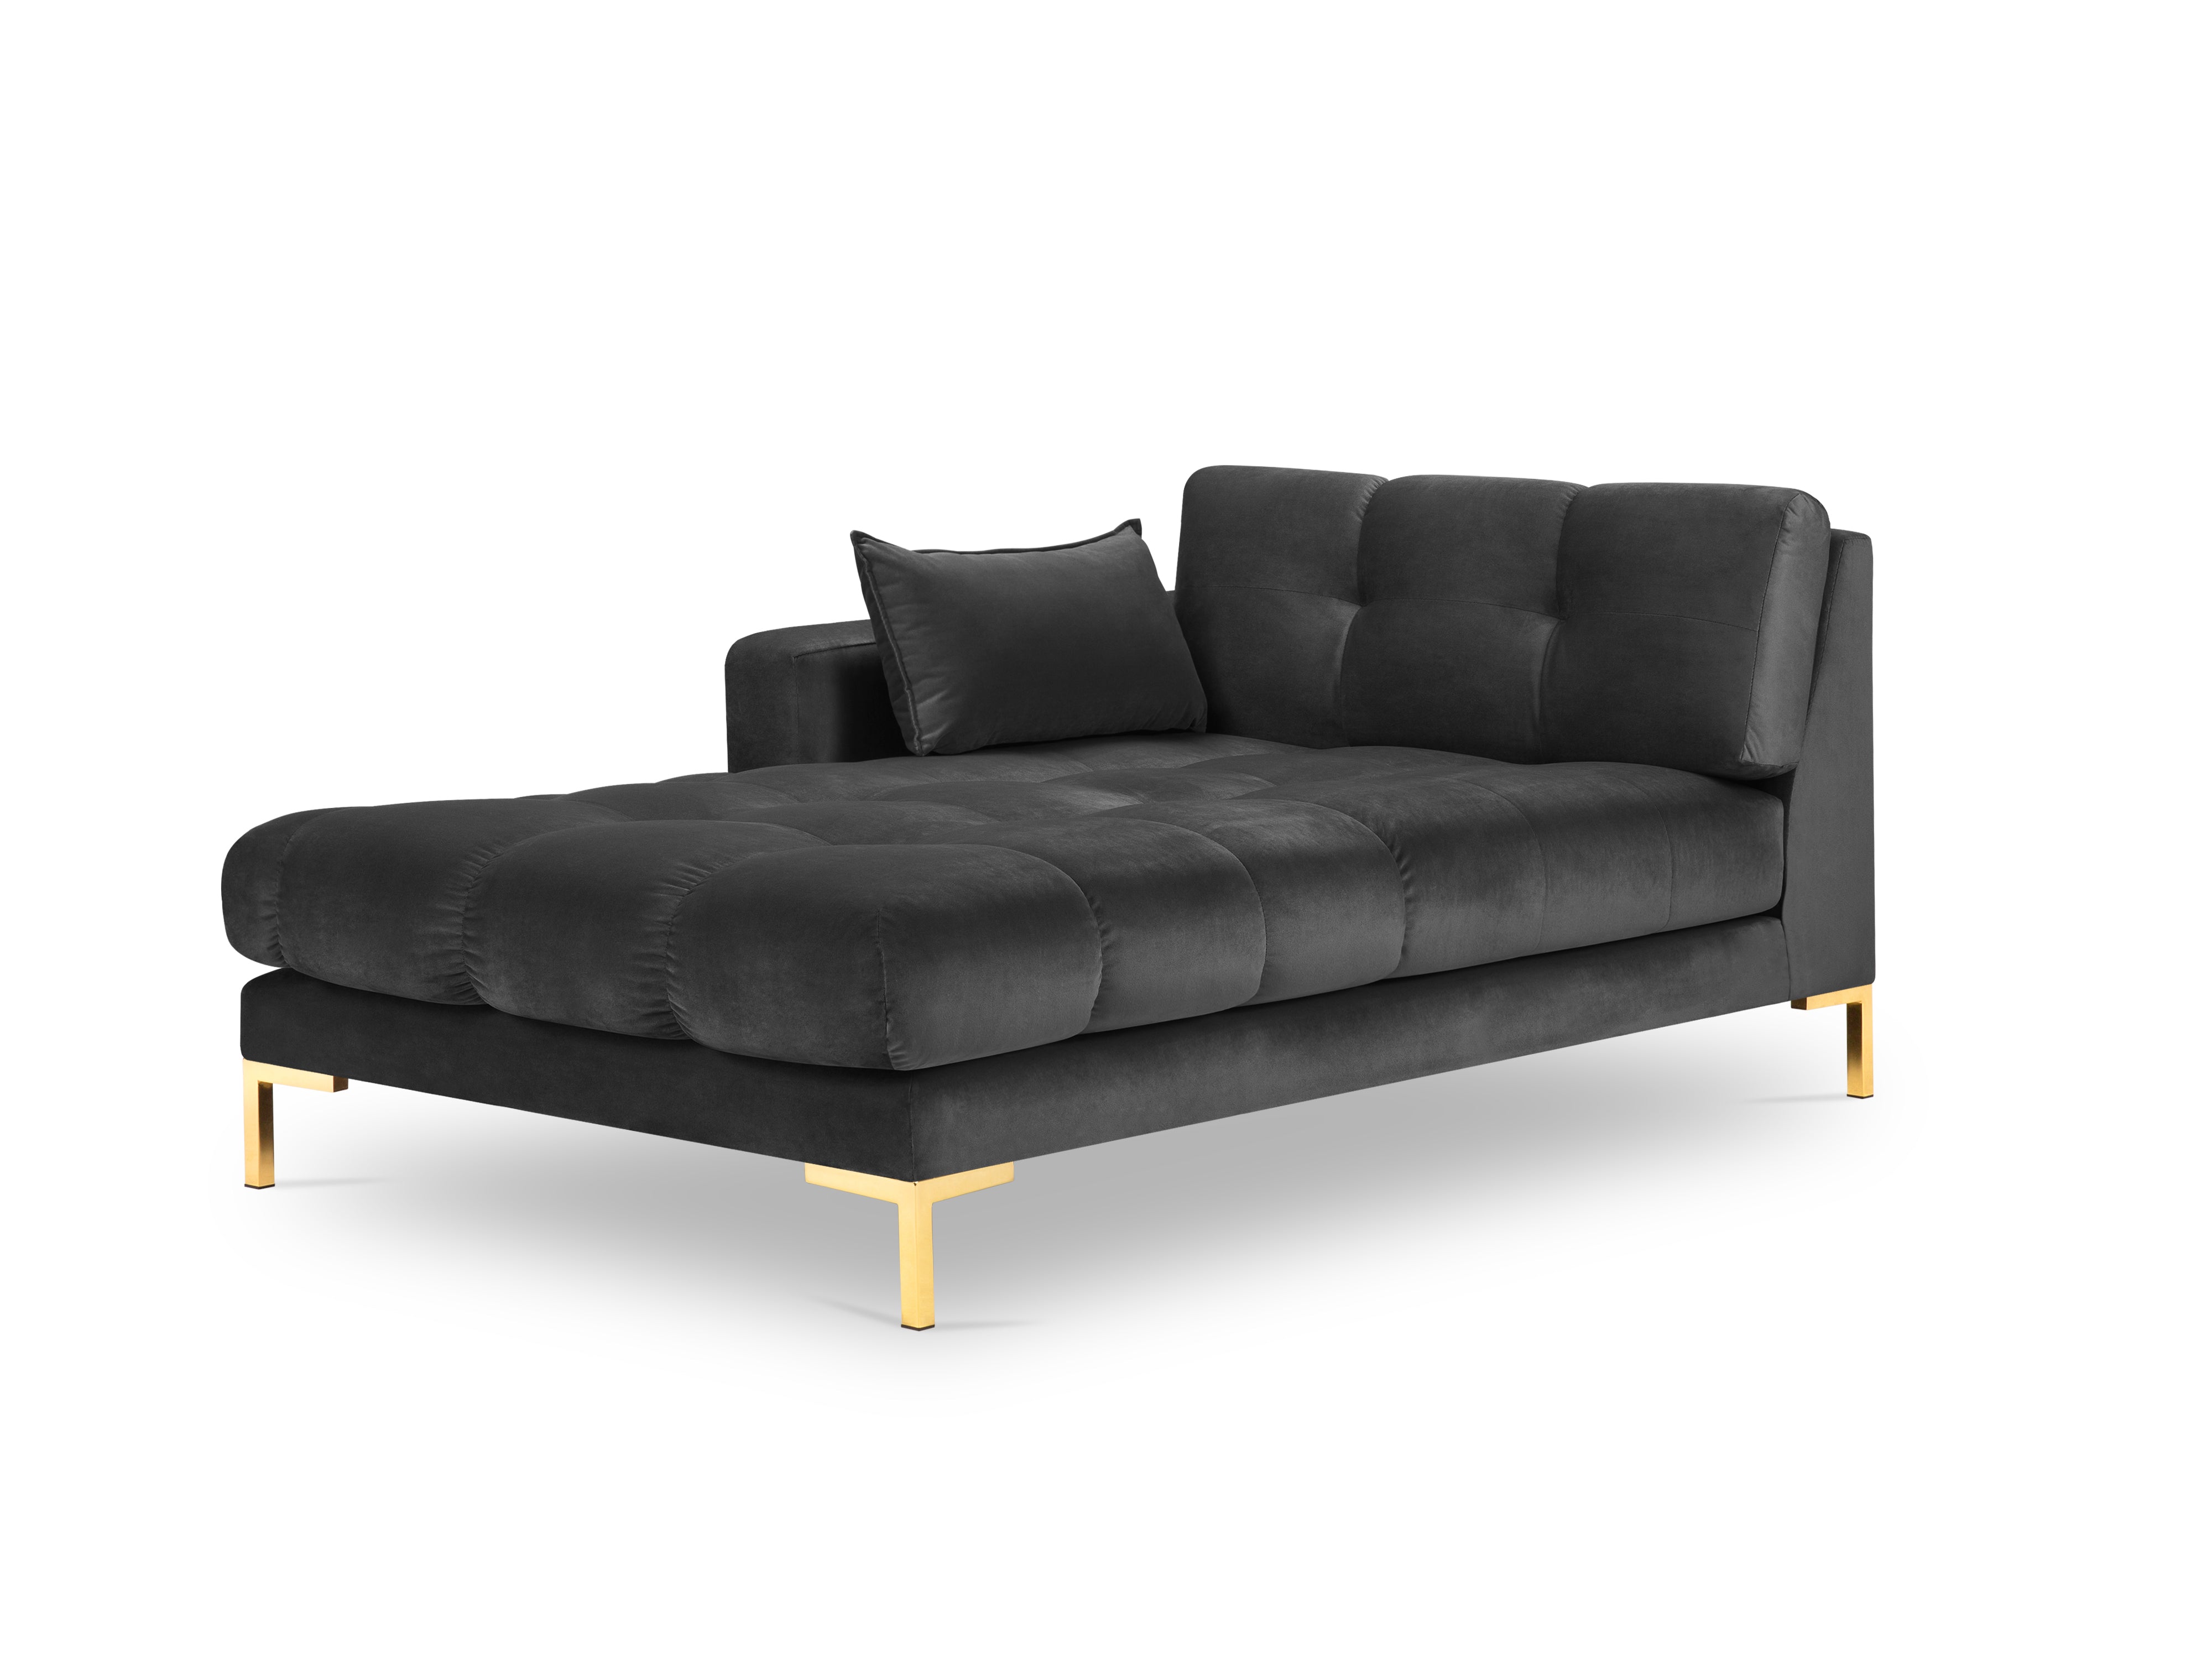 Dark gray chaise lounge with a golden base